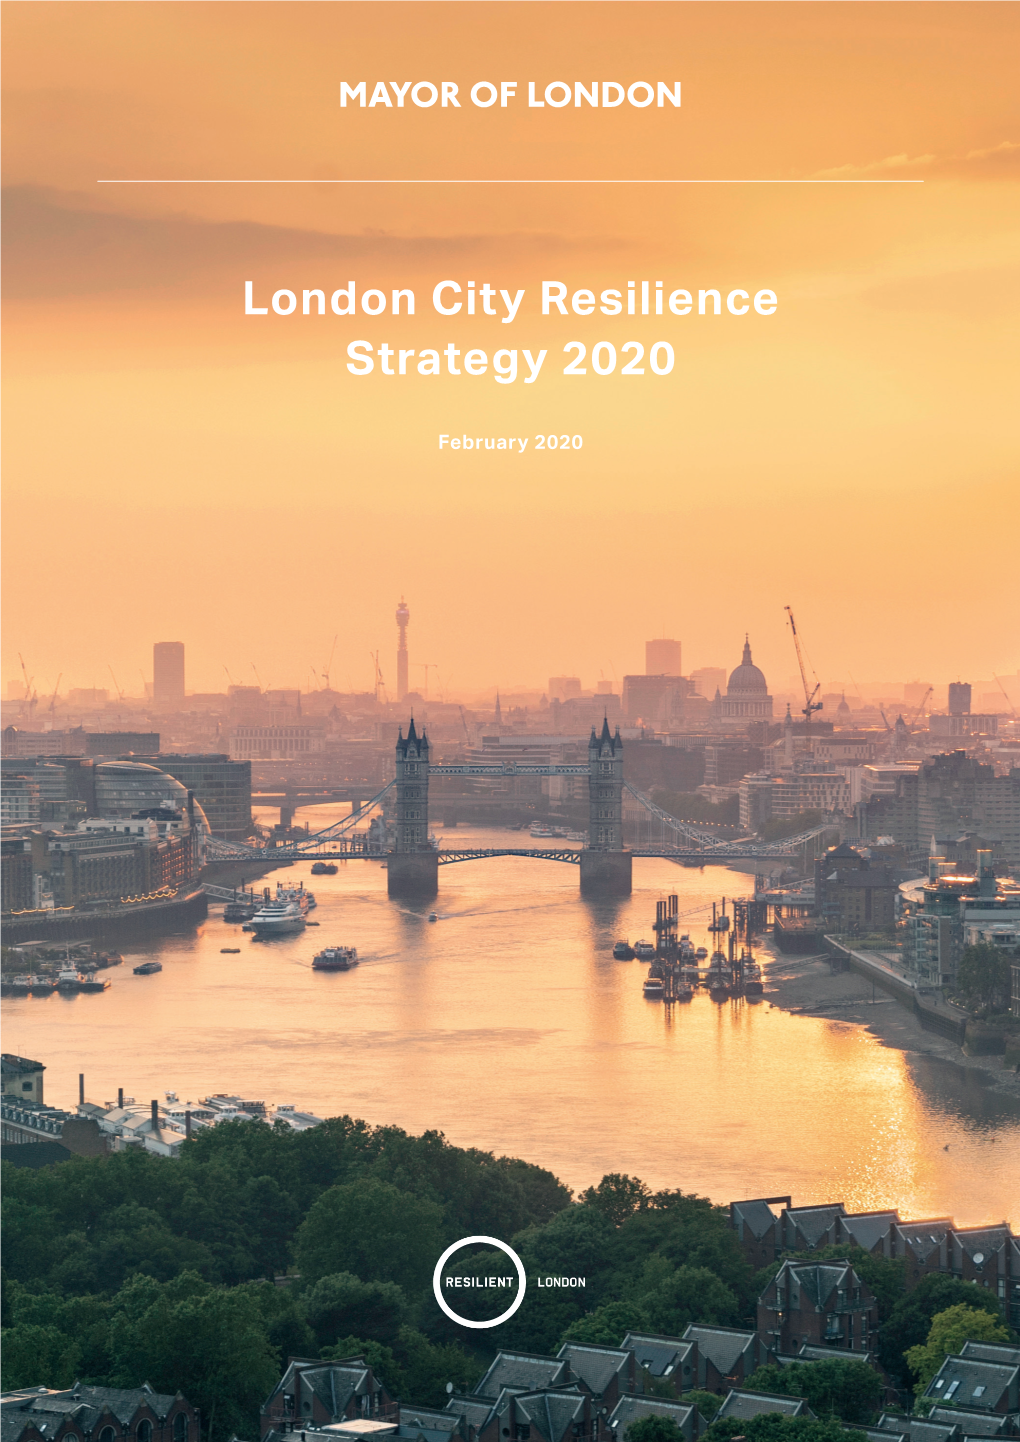 London City Resilience Strategy 2020